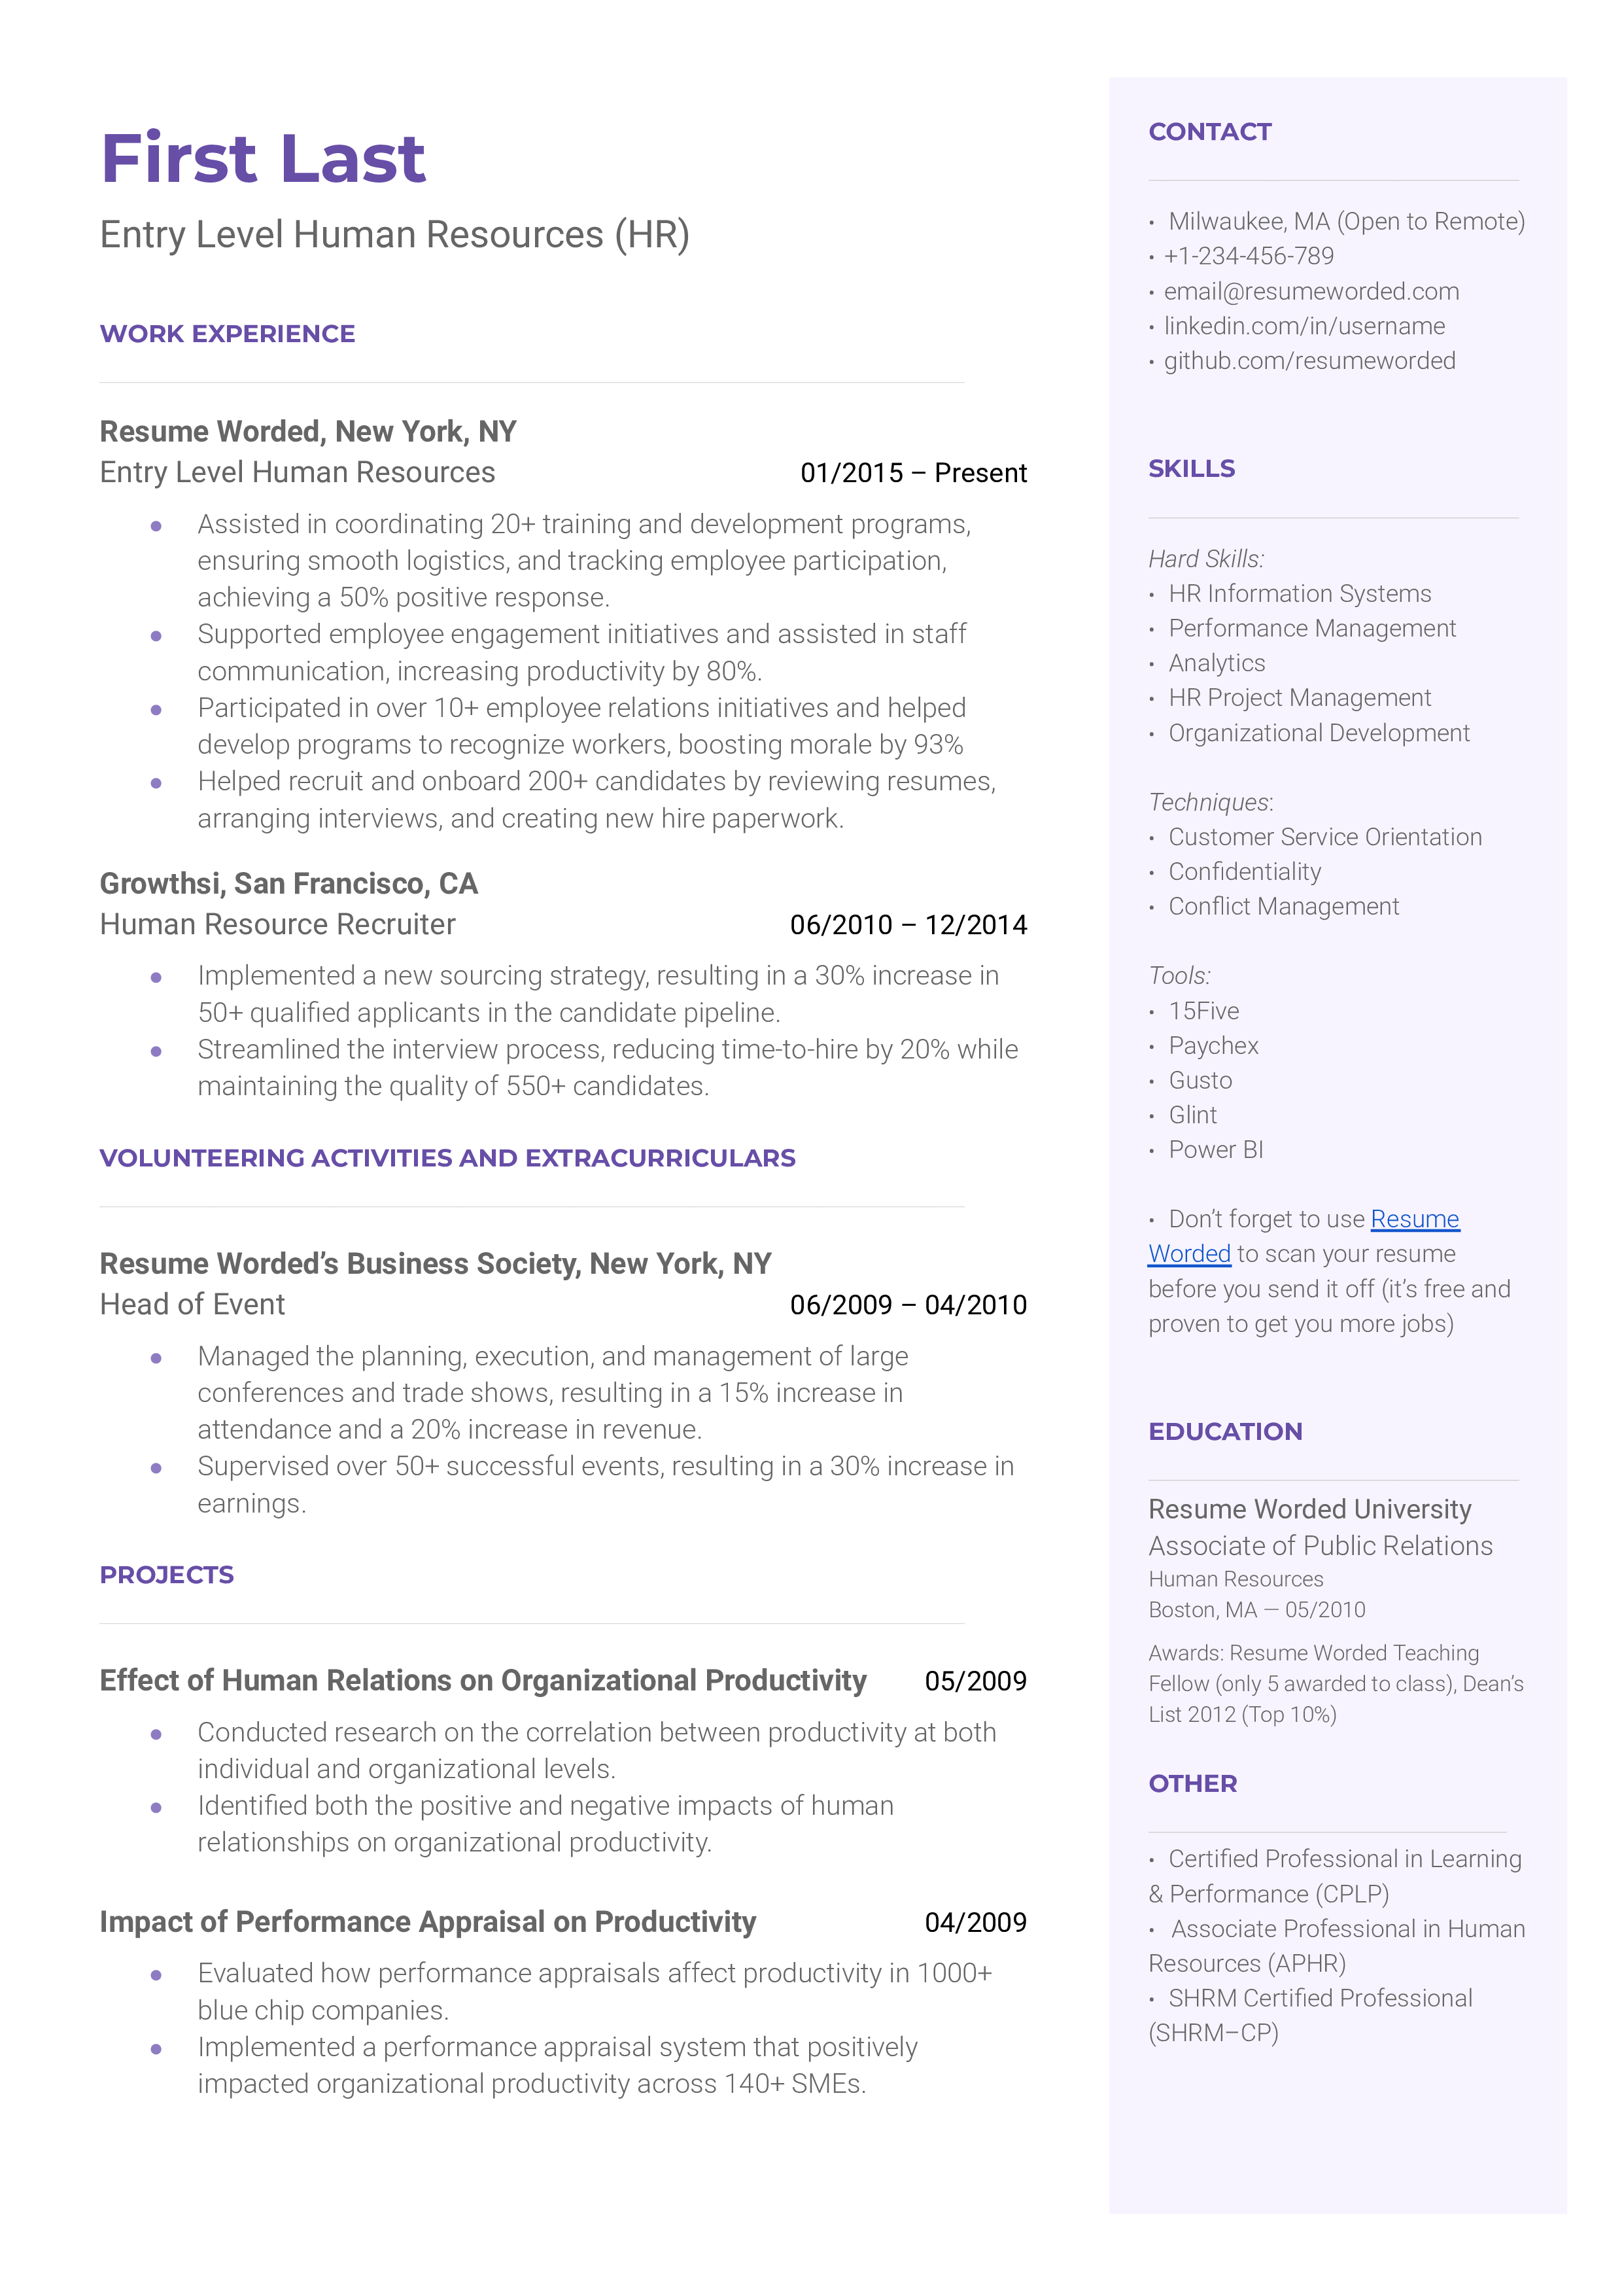 A professional CV of an entry-level HR applicant showcasing soft skills and tech familiarity.